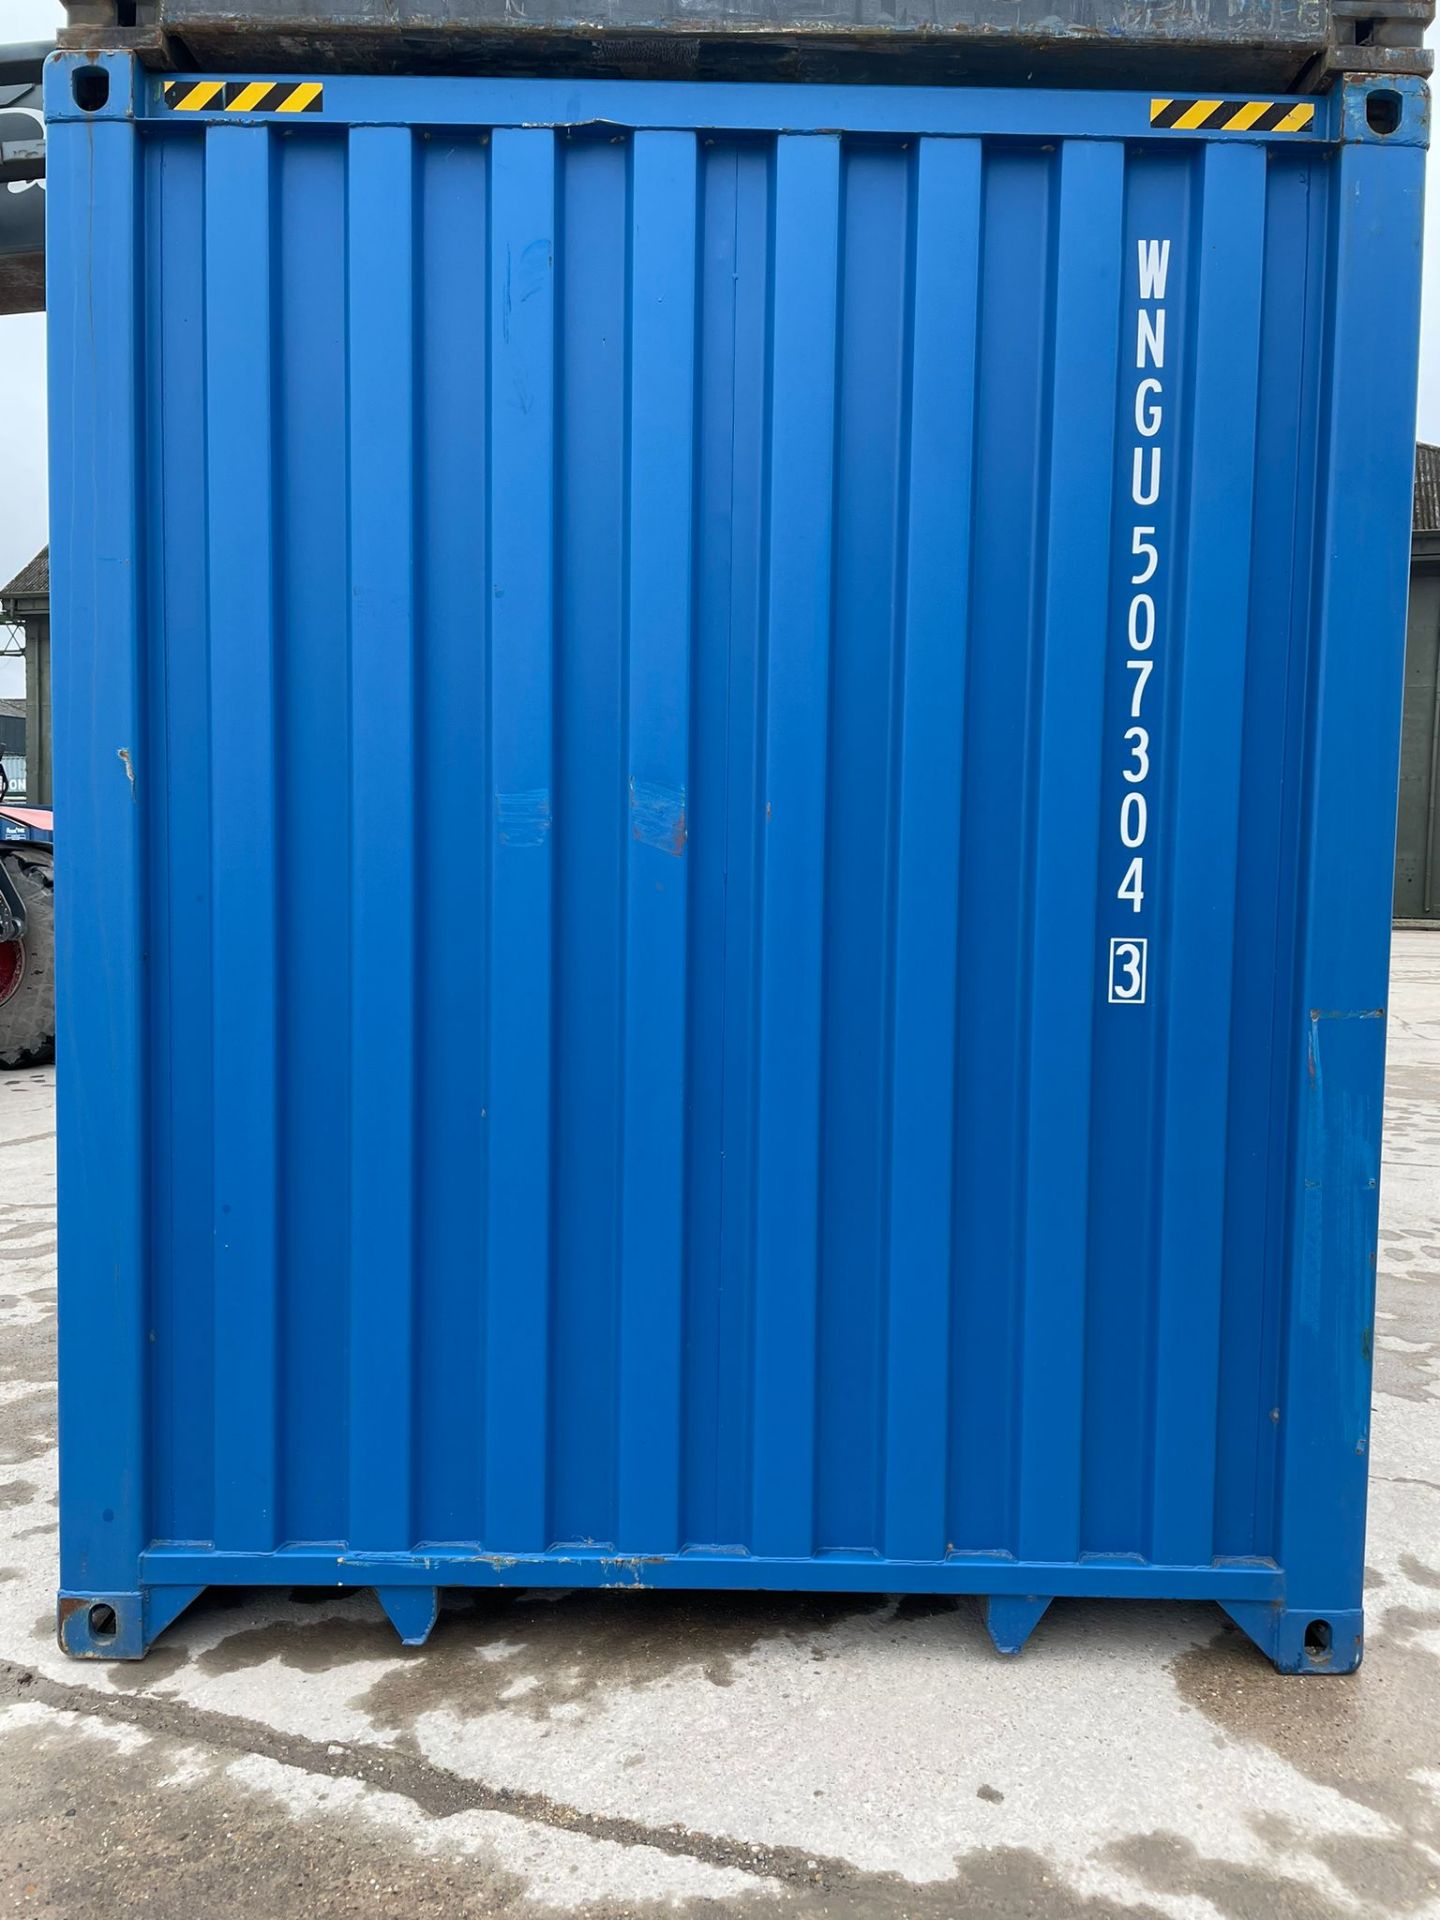 40ft HC Shipping Container - ref WNGU5073043 - NO RESERVE - Image 3 of 5